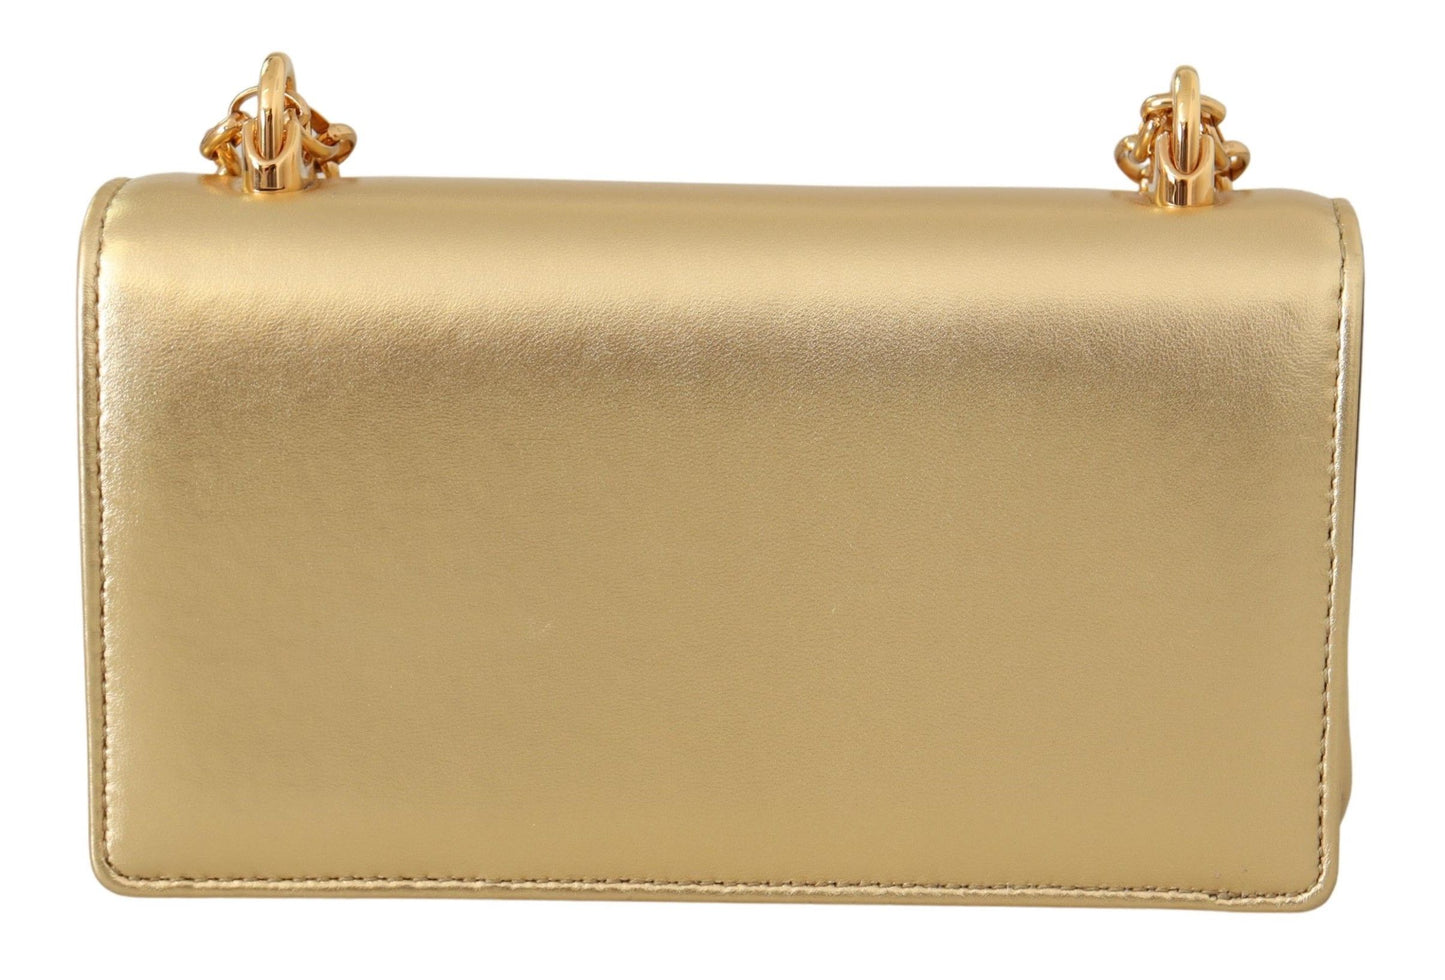 Elegant Gold Leather Phone Purse with Chain Strap